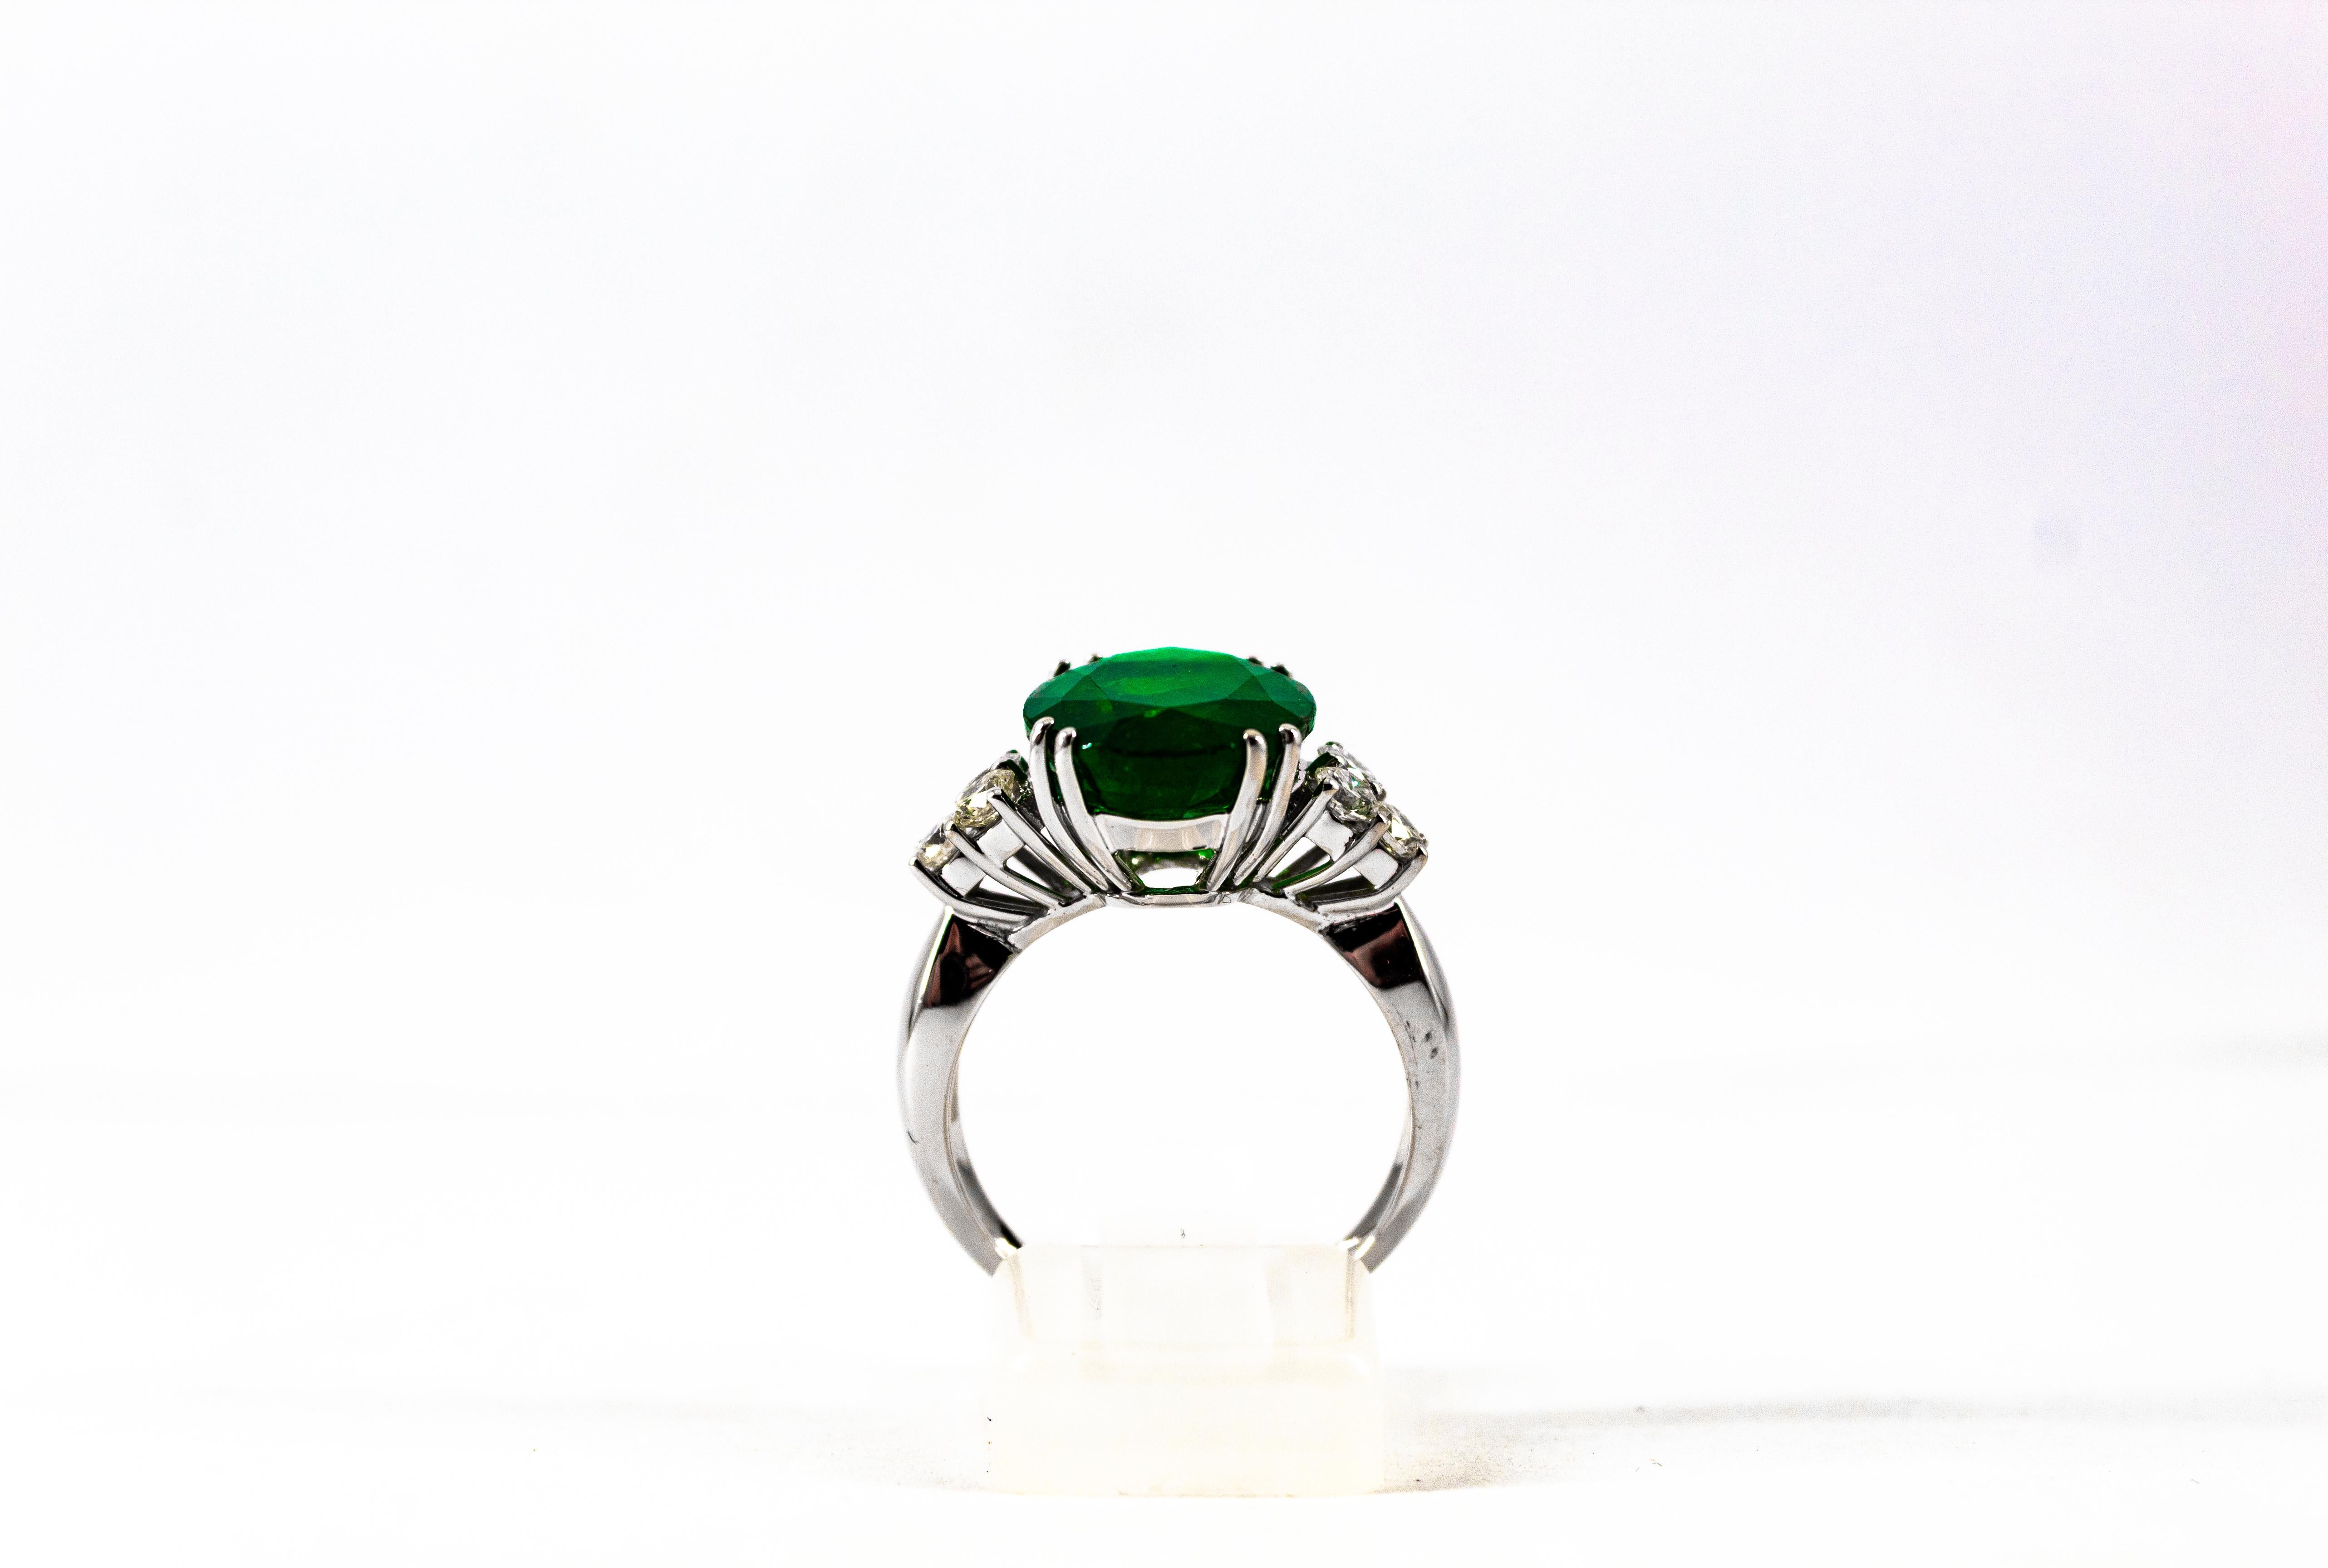 This Ring is made of 18K White Gold.
This Ring has 0.60 Carats of White Modern Round Cut Diamonds. Color: H-G Clarity: VVS1
This Ring has a 6.42 Carats Natural Zambia Oval Cut Emerald.

Size ITA: 15 USA: 7

We're a workshop so every piece is